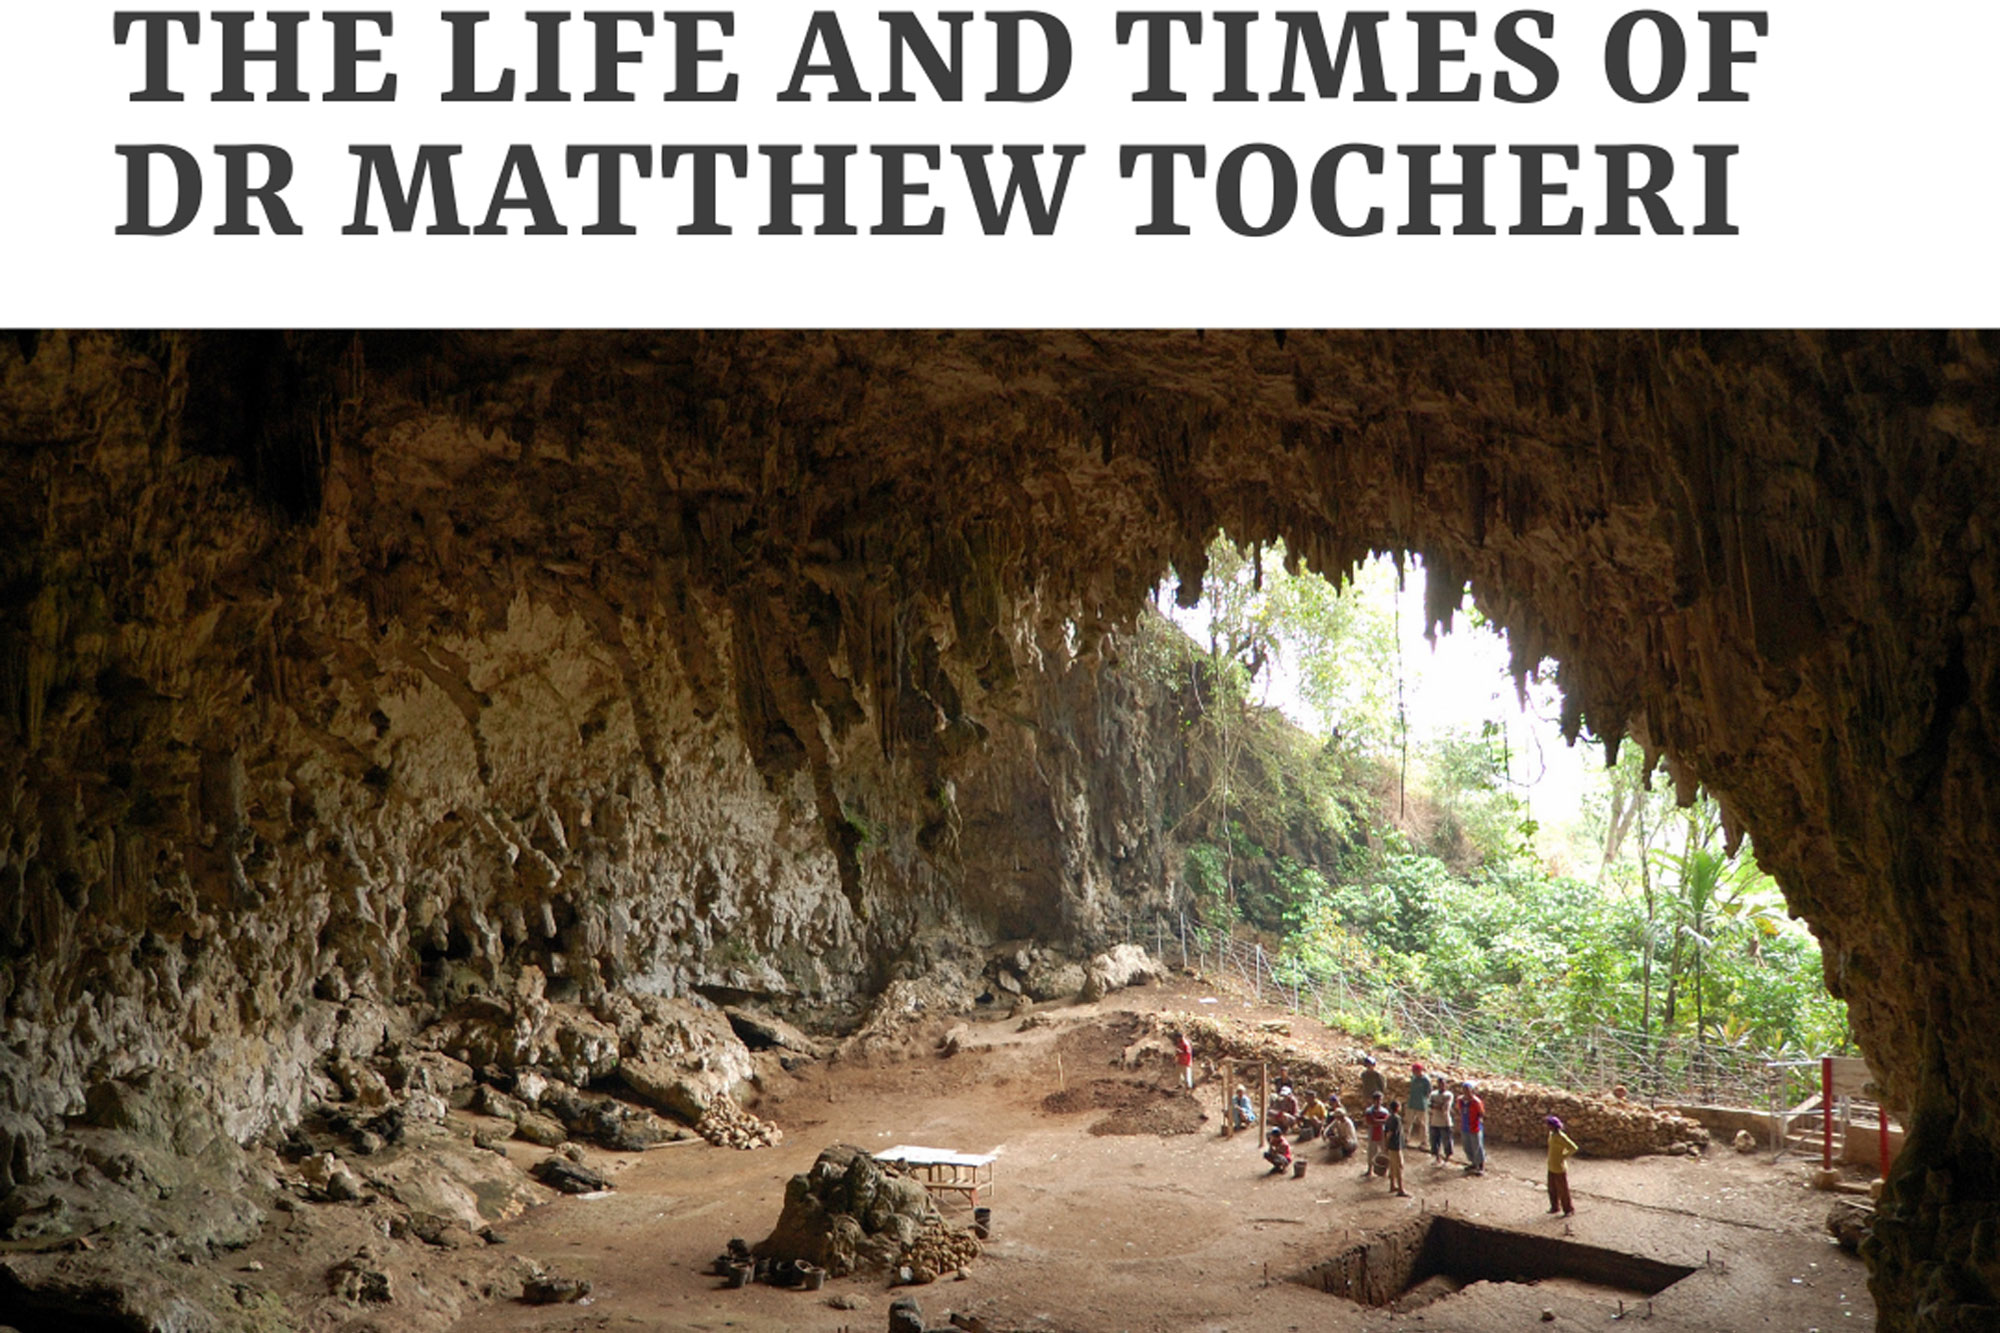 The Life and Times of Dr Matthew Tocheri slide, with image of an archaeological dig below